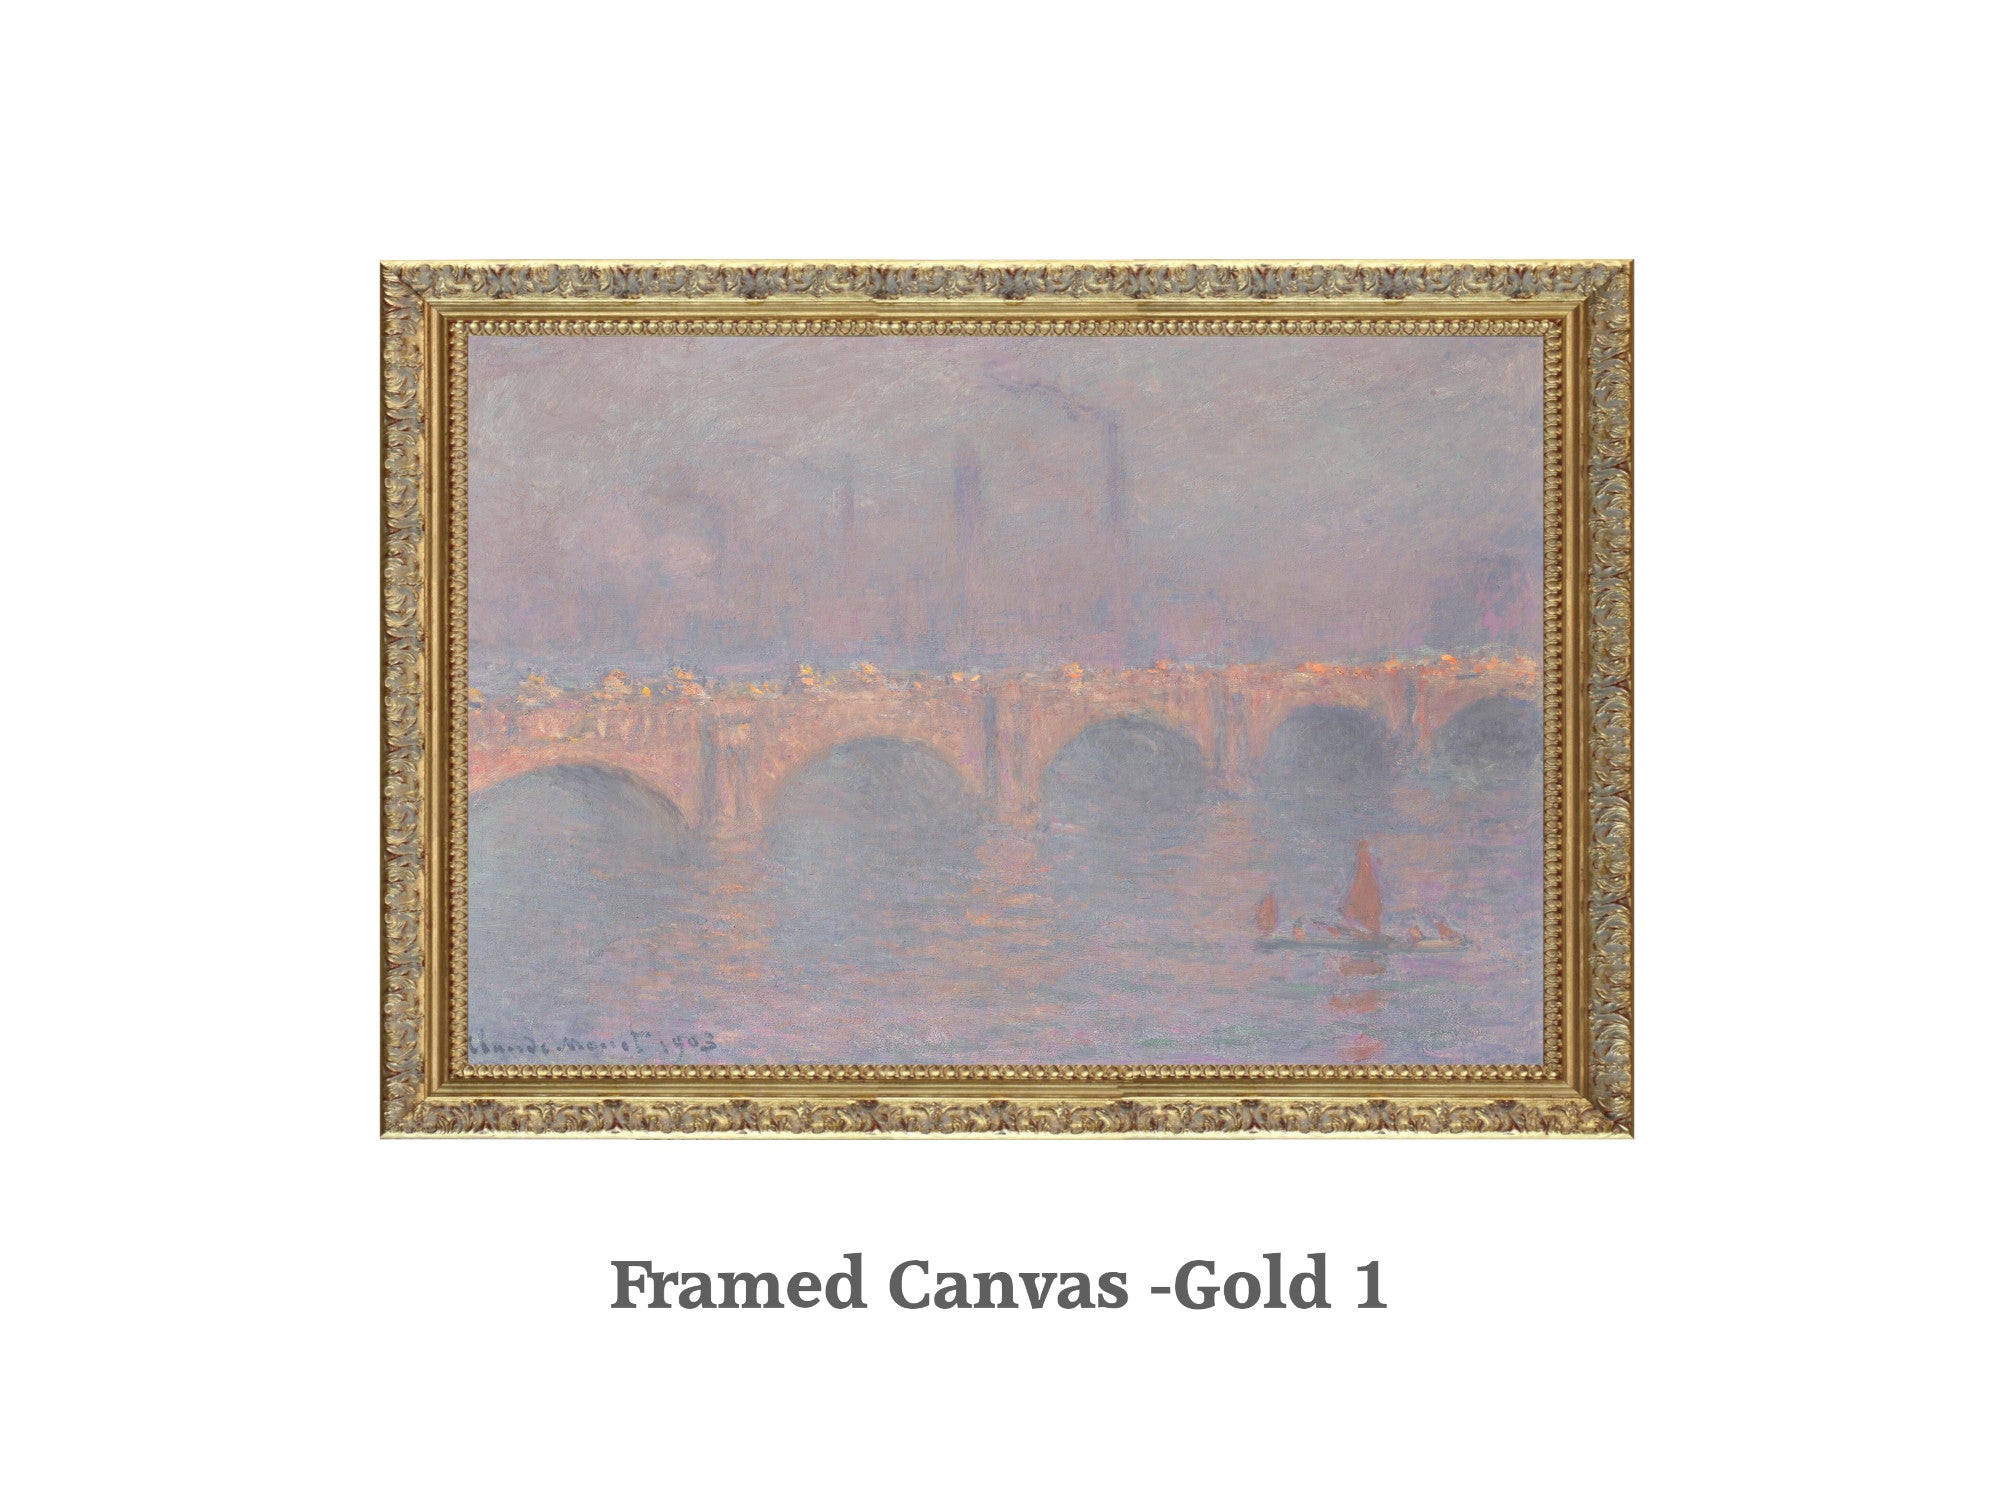 Waterloo Bridge, Obscured Sun, Claude Monet, Gallery Quality Canvas Reproduction